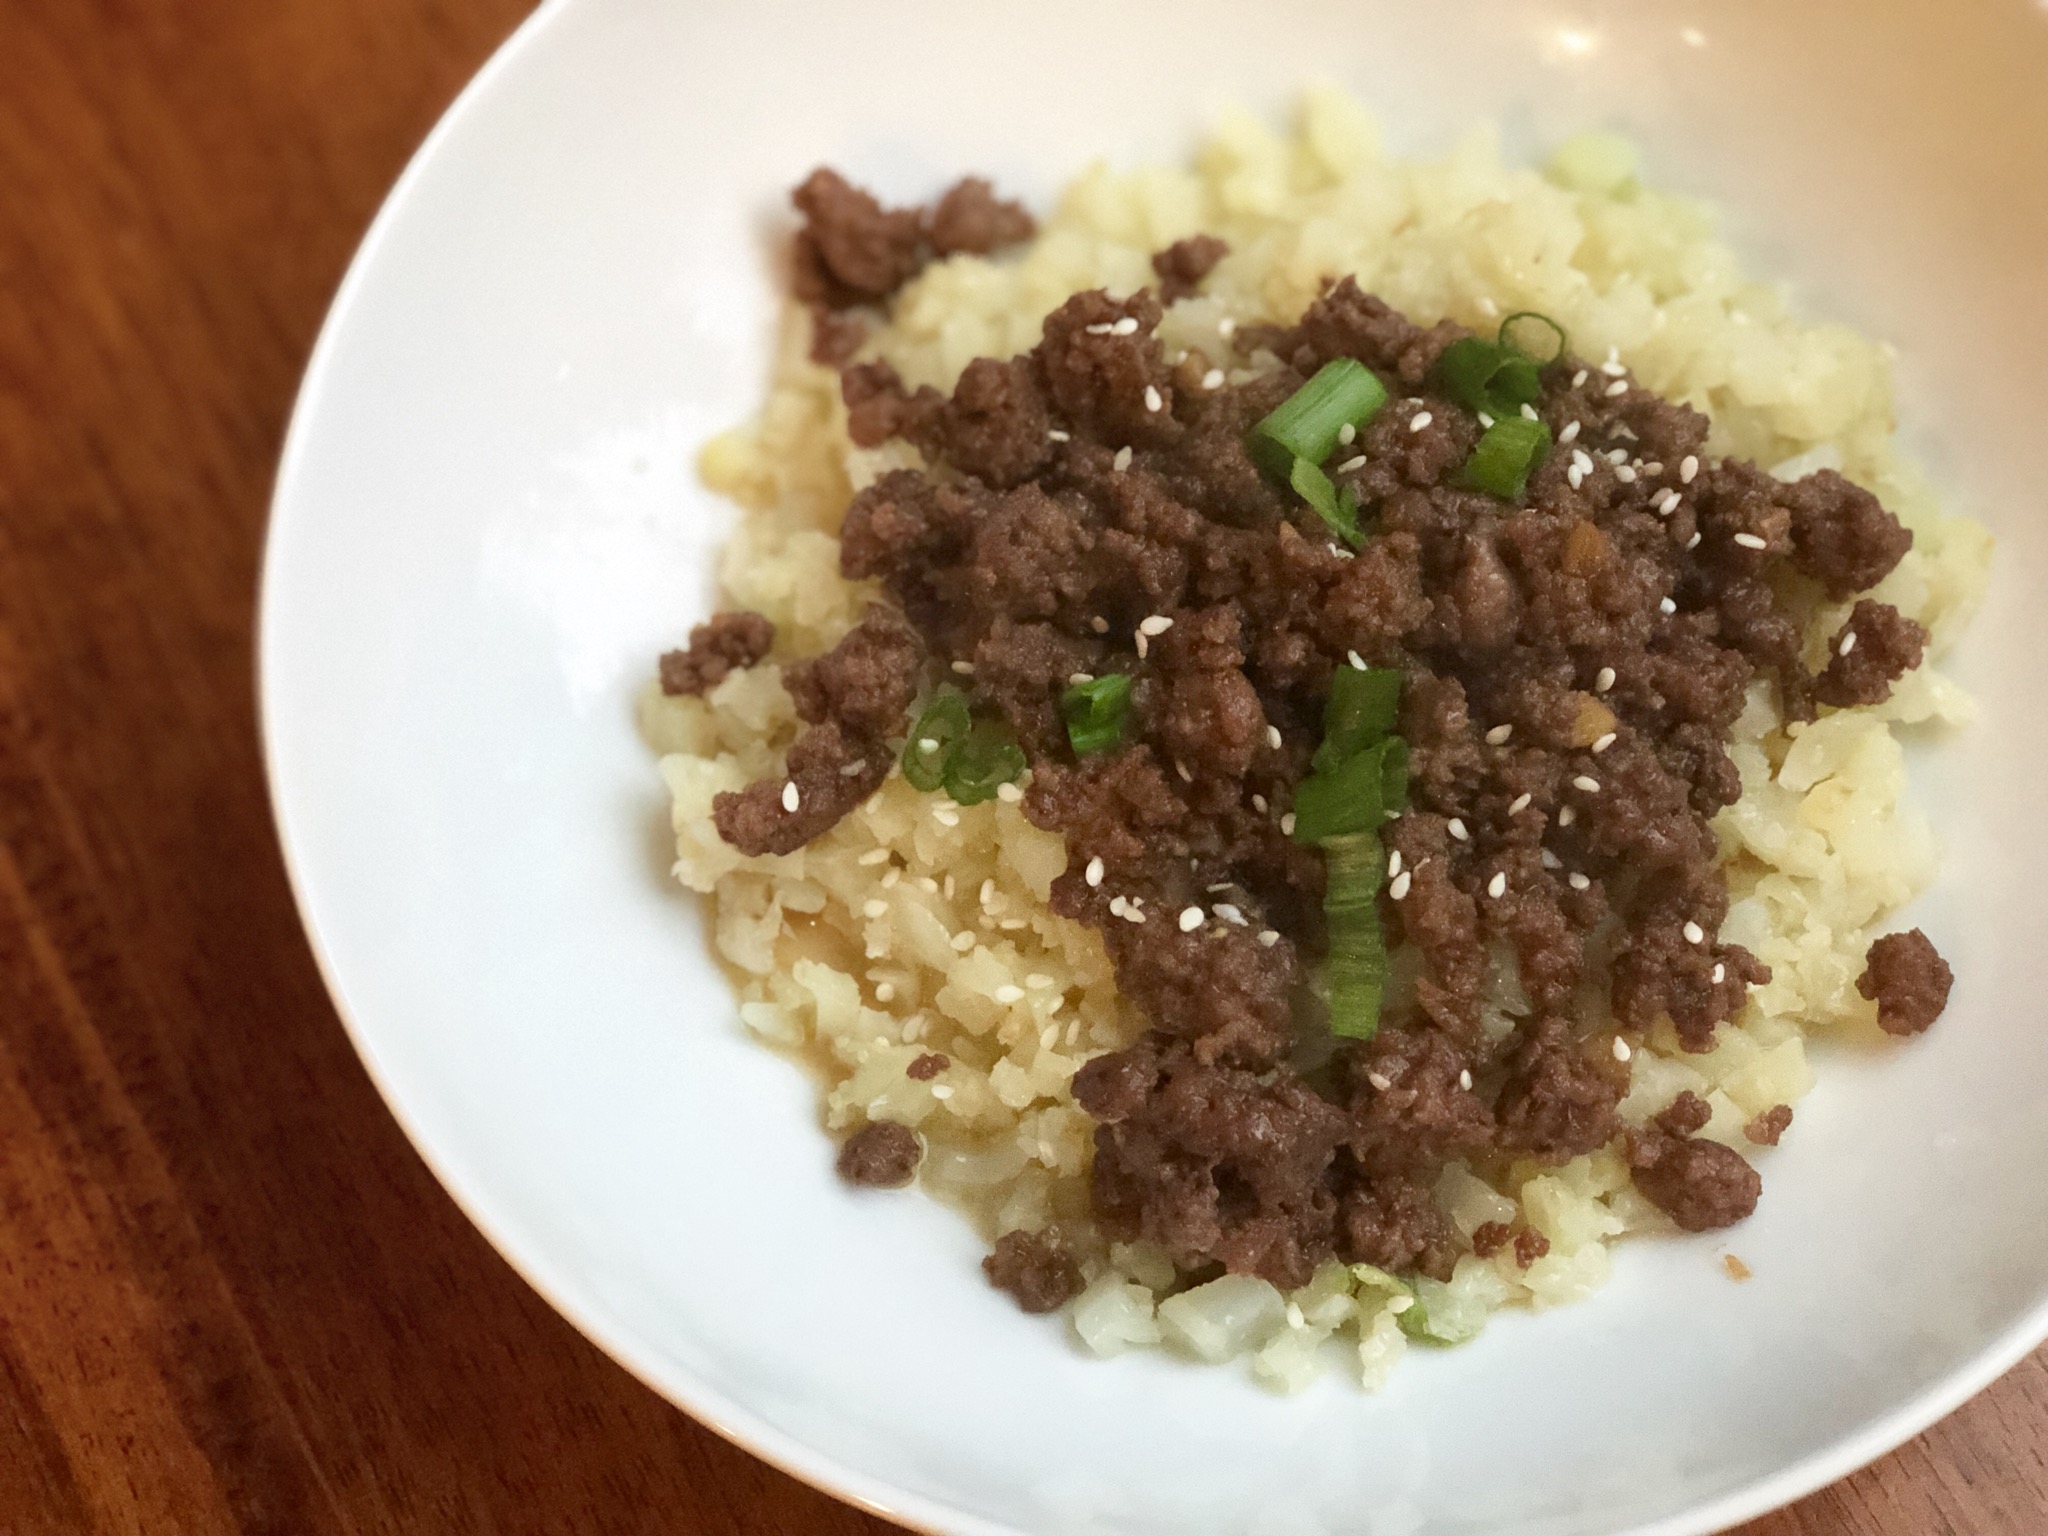 Ground beef is cooked in a soy, ginger, garlic, and black pepper sauce. Serve over cauliflower rice with green onions and sesame seeds for a low-carb Asian-inspired meal that's quick and easy and truly tasty.
                          